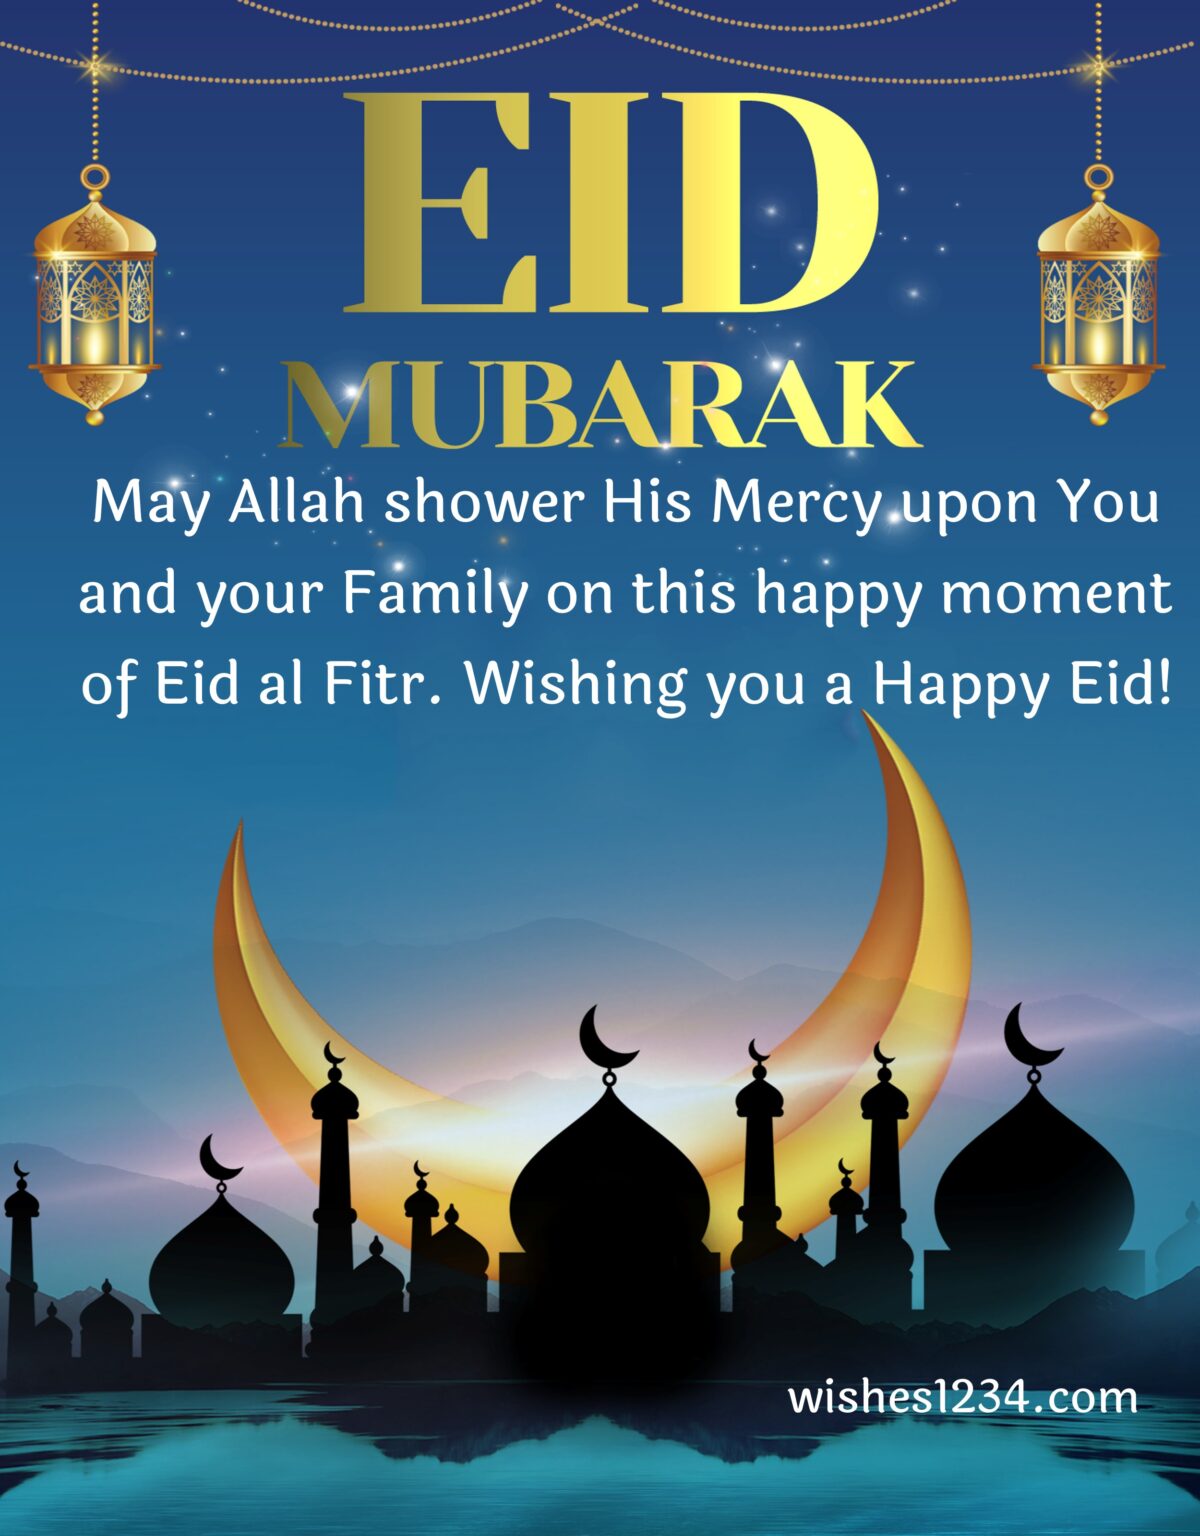 100+ Eid Mubarak Wishes, Messages and Greetings